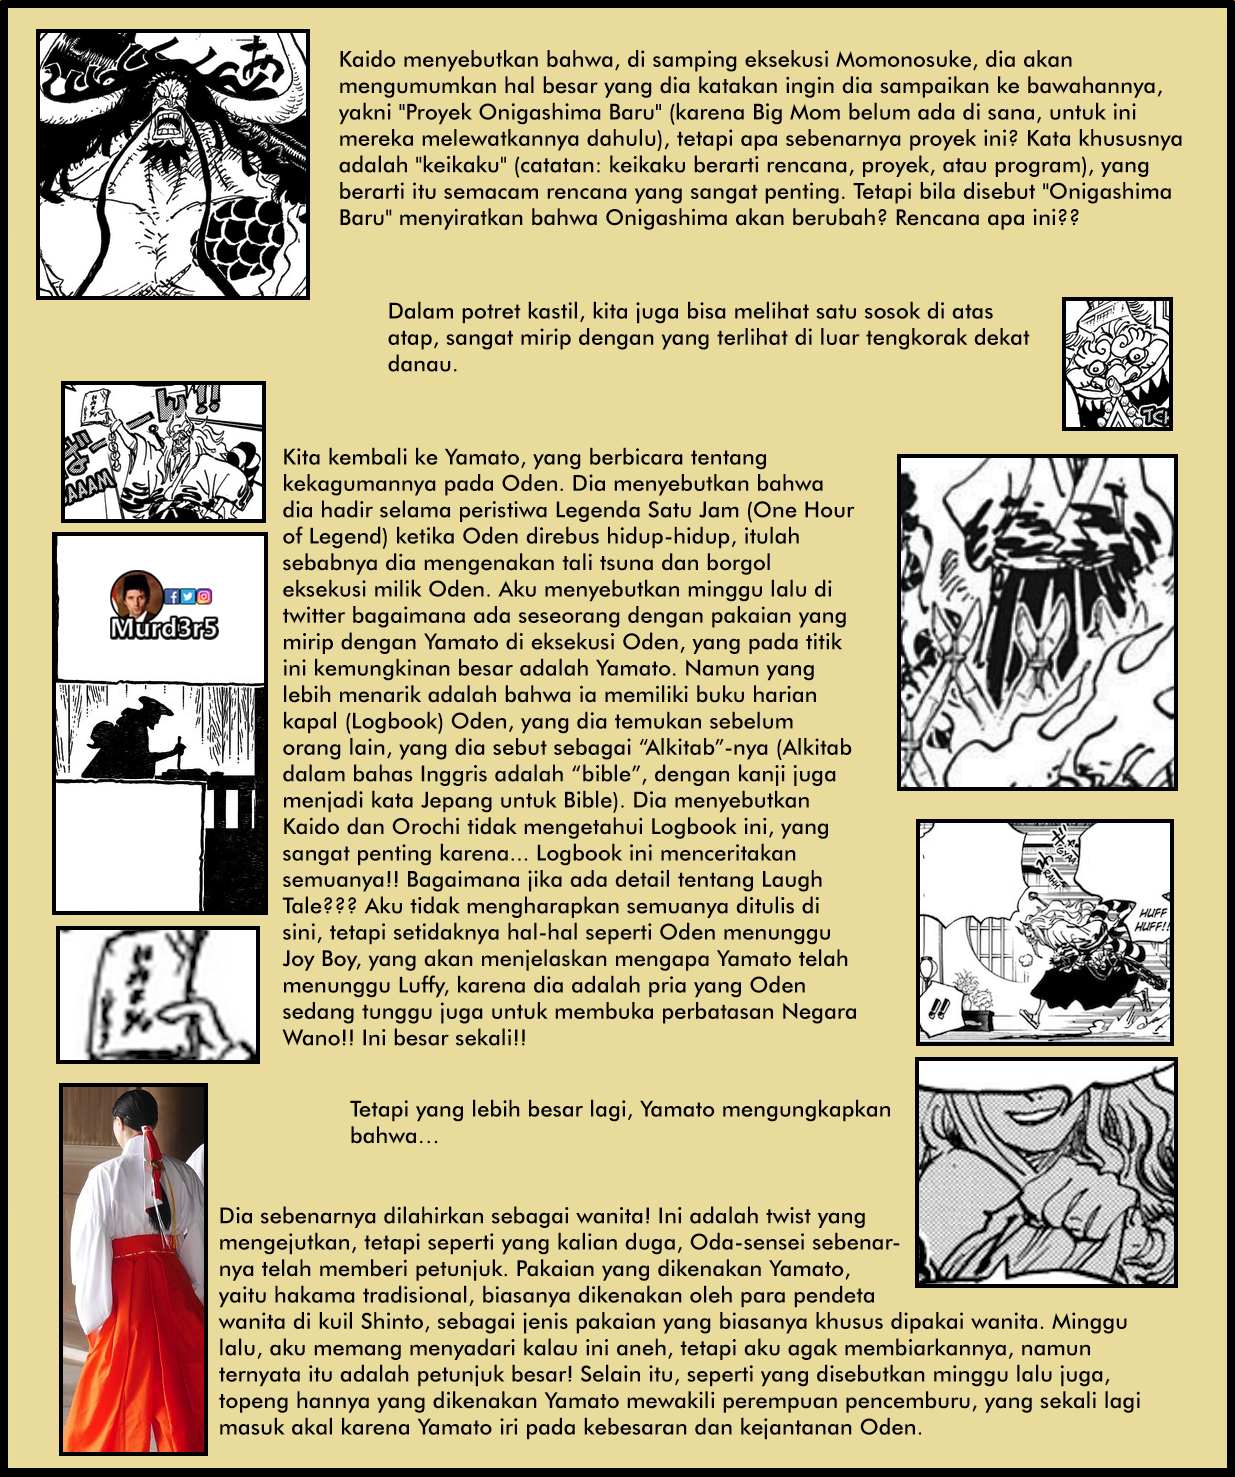 one-piece-chapter-984-analysis-4